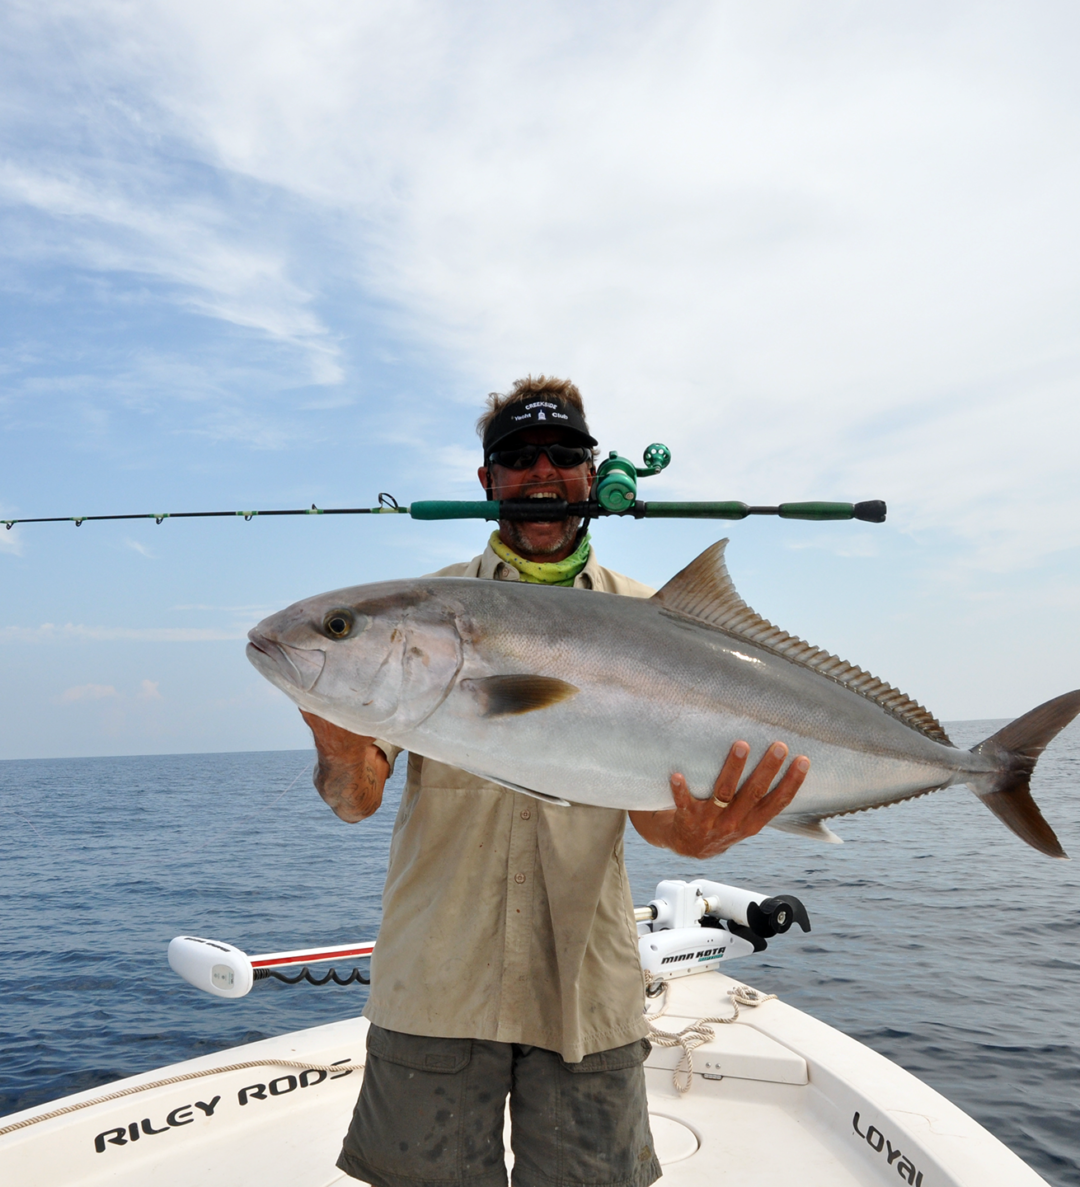 Capt Mike Fishing - NX Fishing Charters - Riley Rods - Team North Fork Composites 8